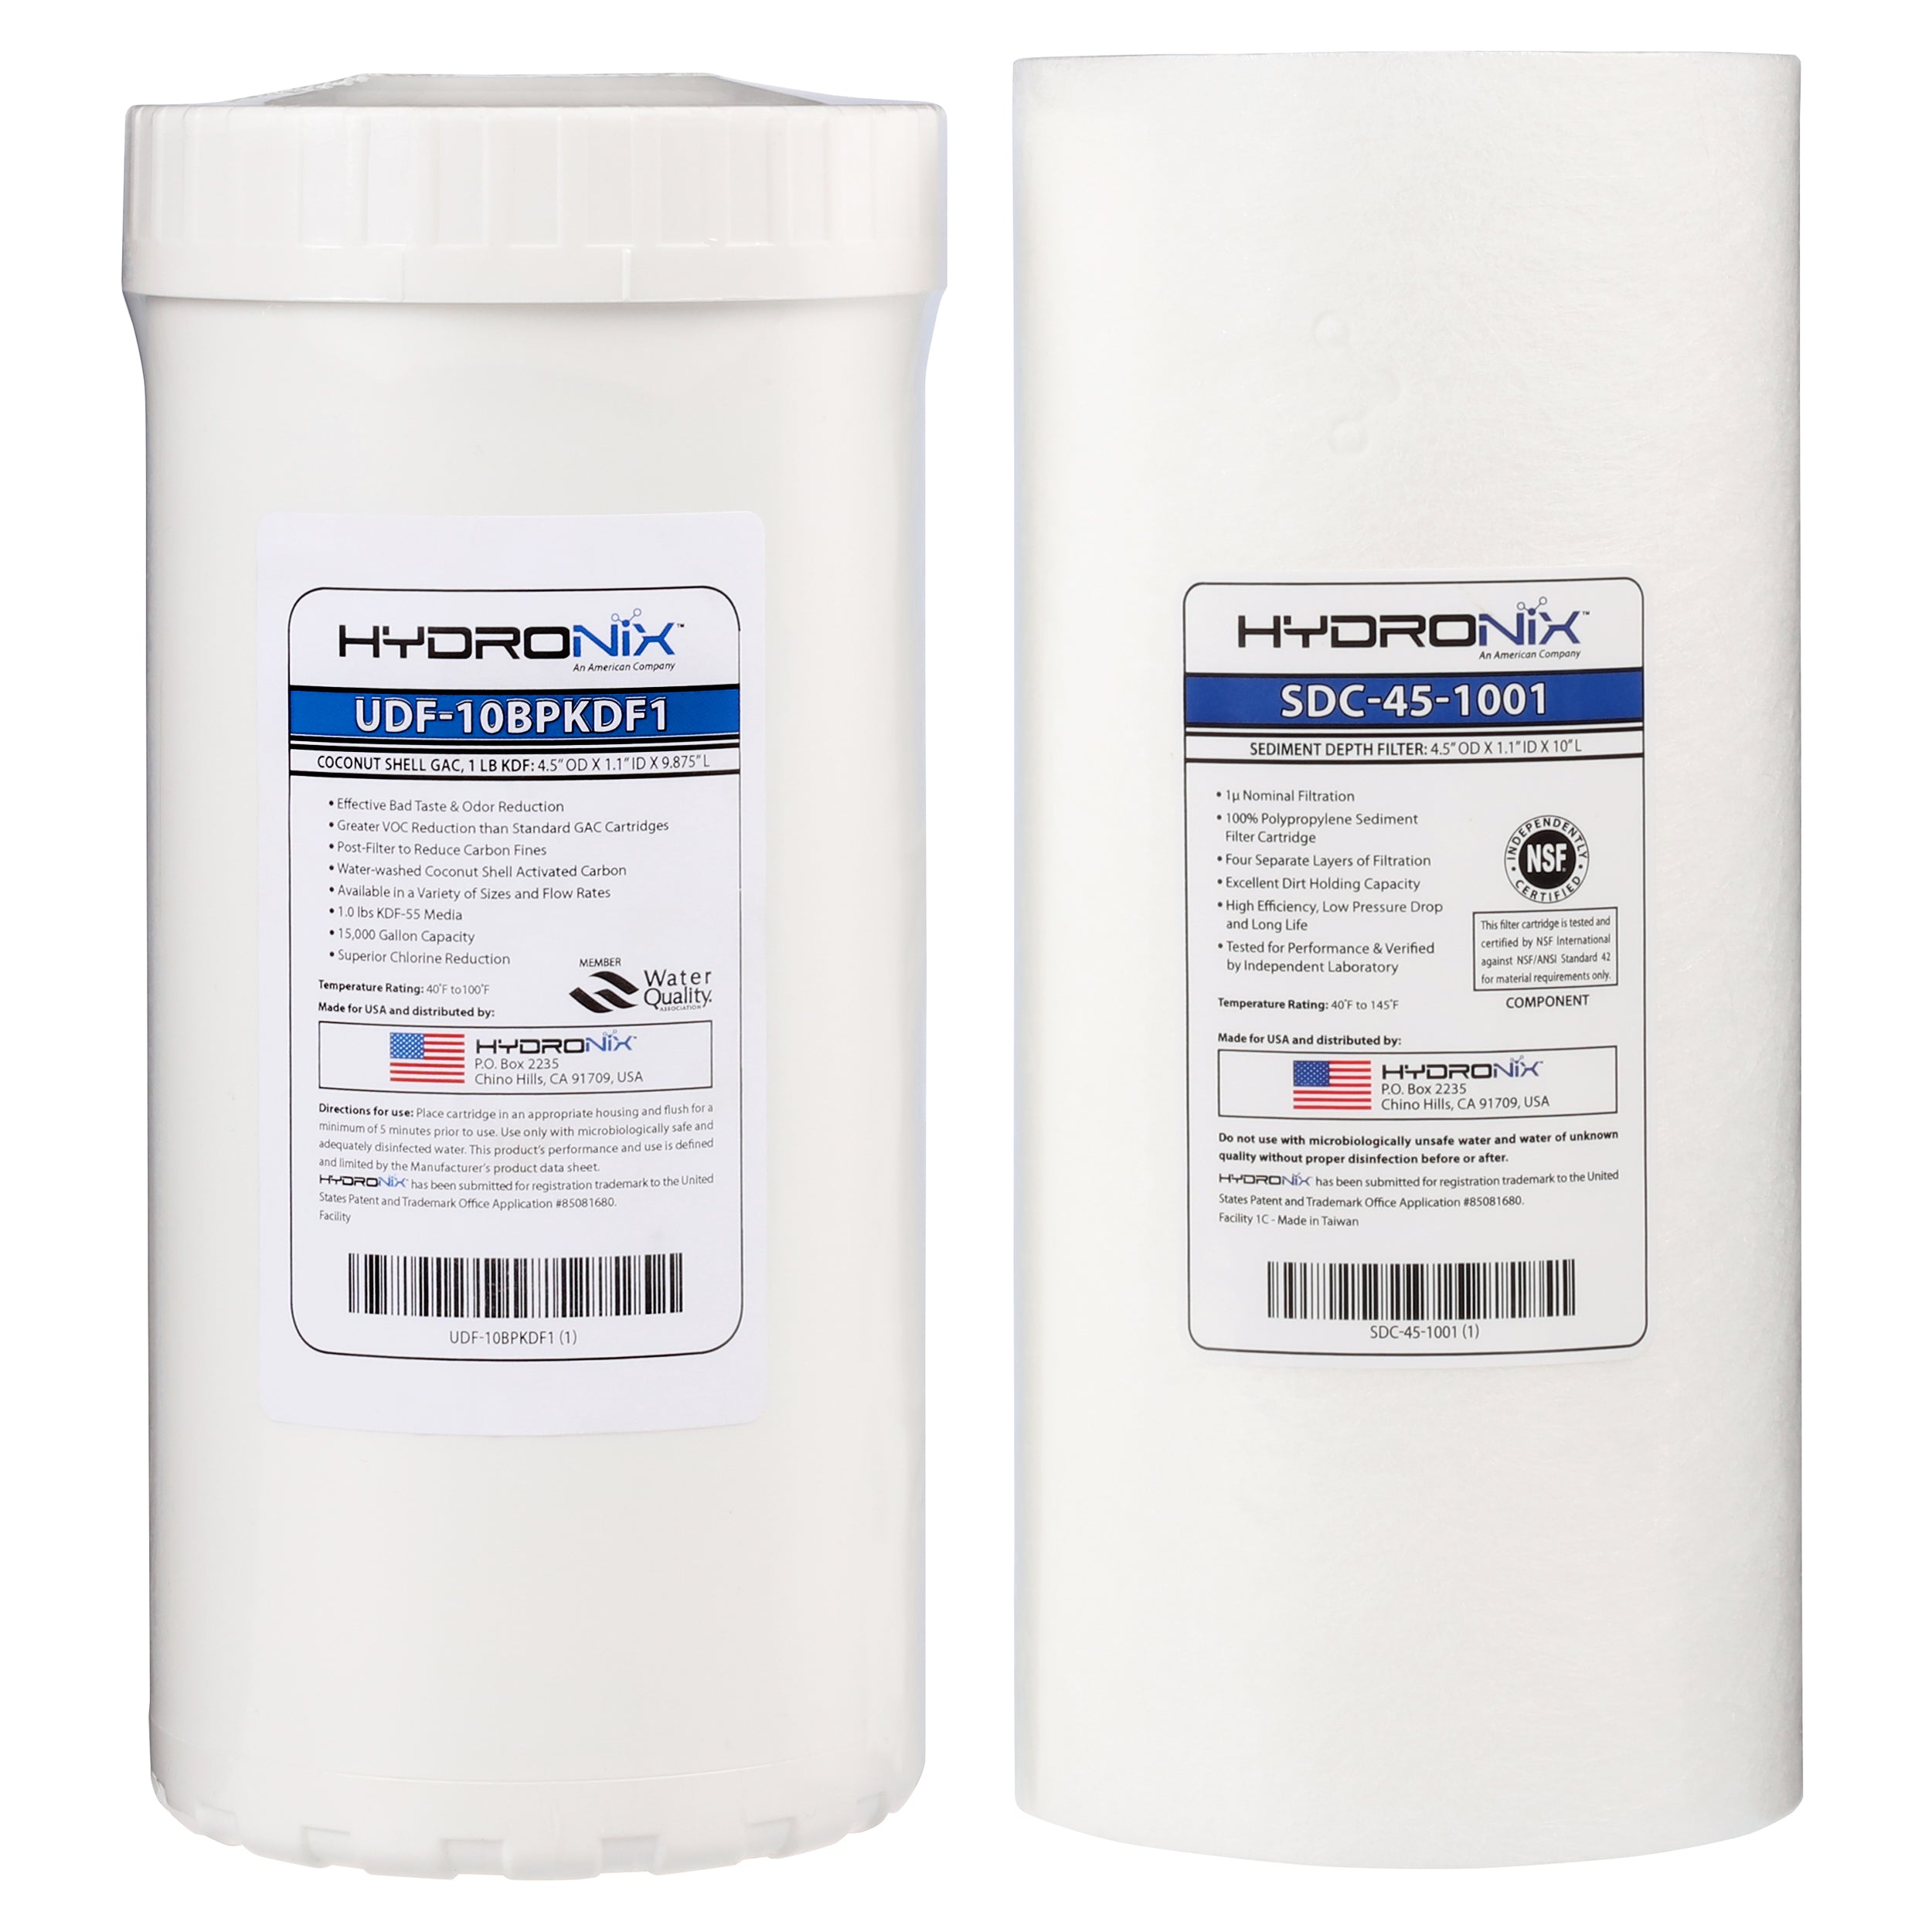 HRV WATER FILTERS (HRV COMPATIBLE) - supercellnz